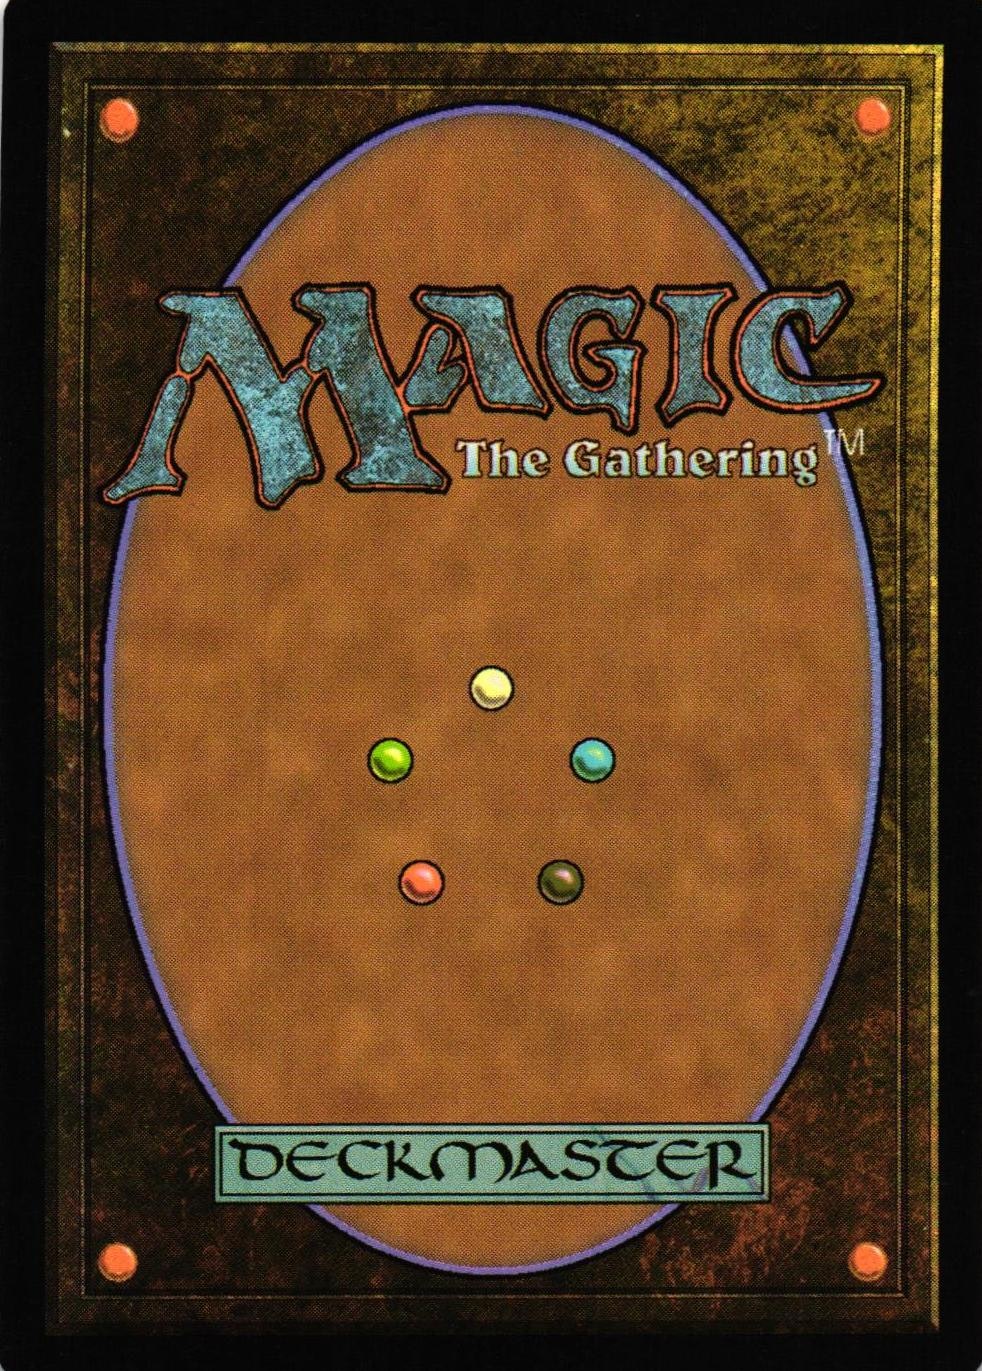 Leonin Snarecaster Common 23/249 Theros (THS) Magic the Gathering